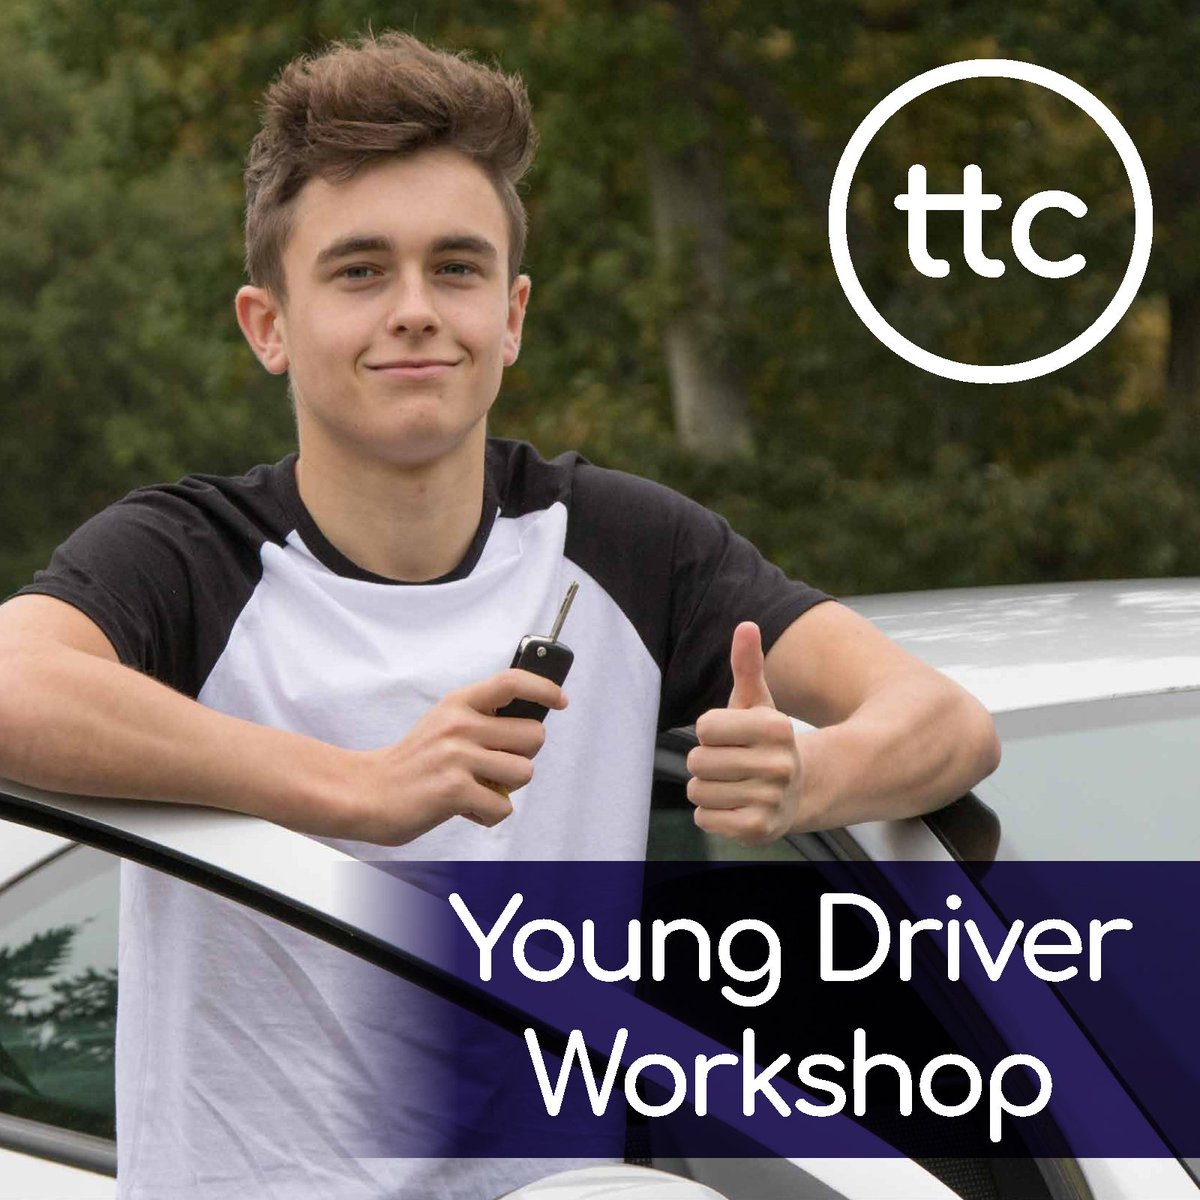 Leaders of post-16 education!

We are currently offering young driver workshops, fully funded by W Yorks Safe Roads Partnership, delivered by @TTCgroupUK. Sessions available to all learners aged 16-21. For details, contact drivertraining@ttc-uk.com
@VisionZeroWY #BDSafeRoads